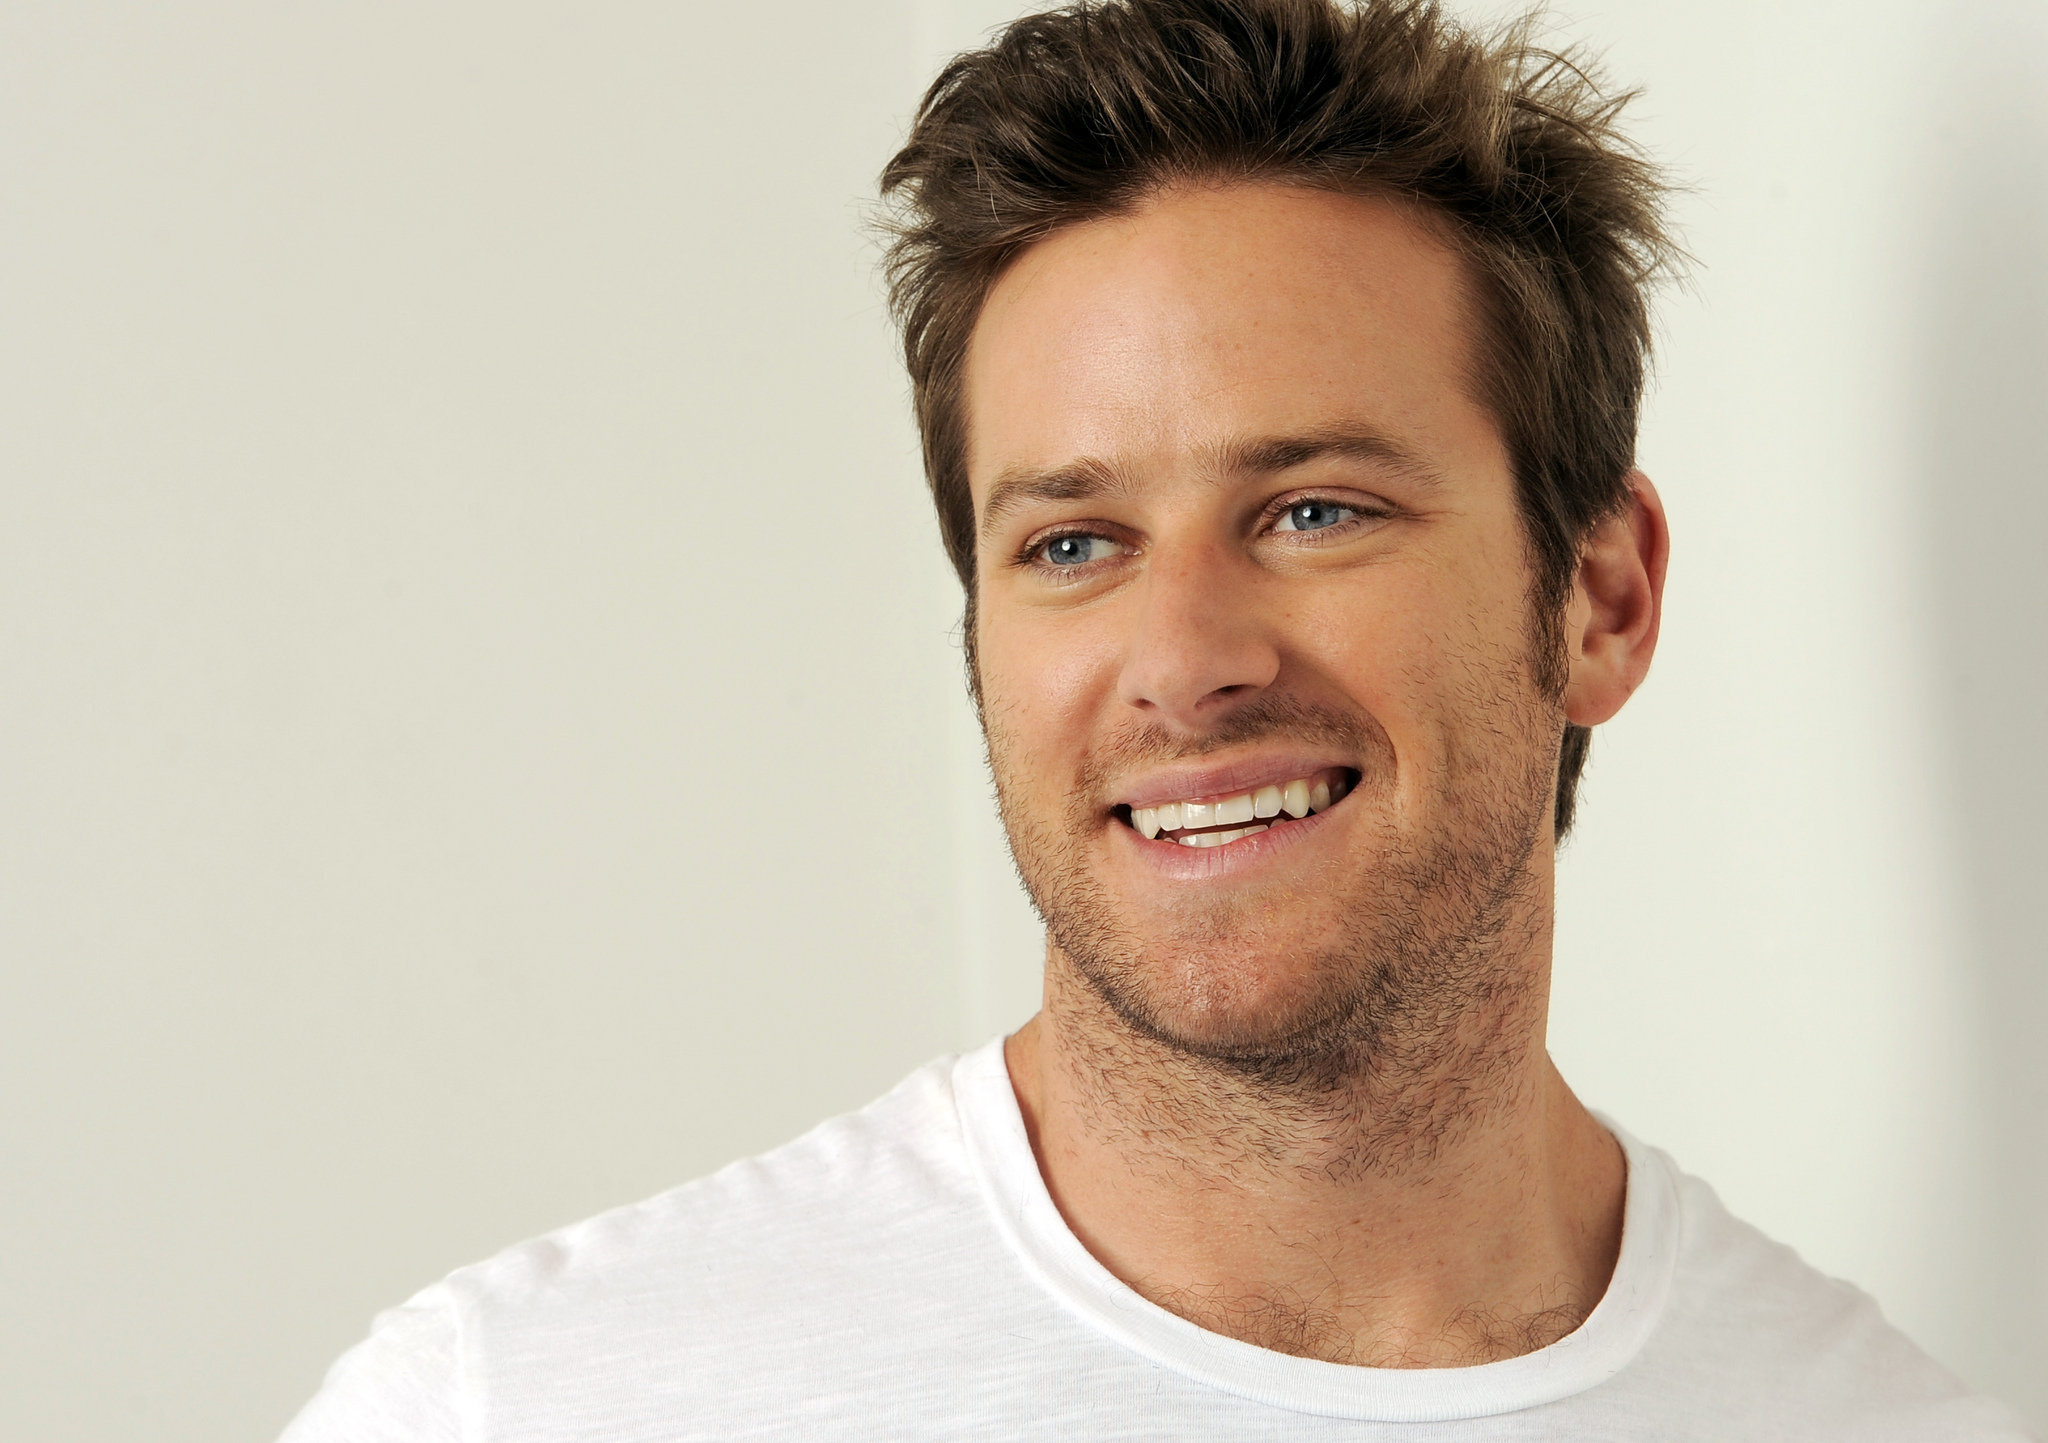 Armie Hammer movies, HD wallpapers, Actor background, High-resolution images, 2050x1450 HD Desktop